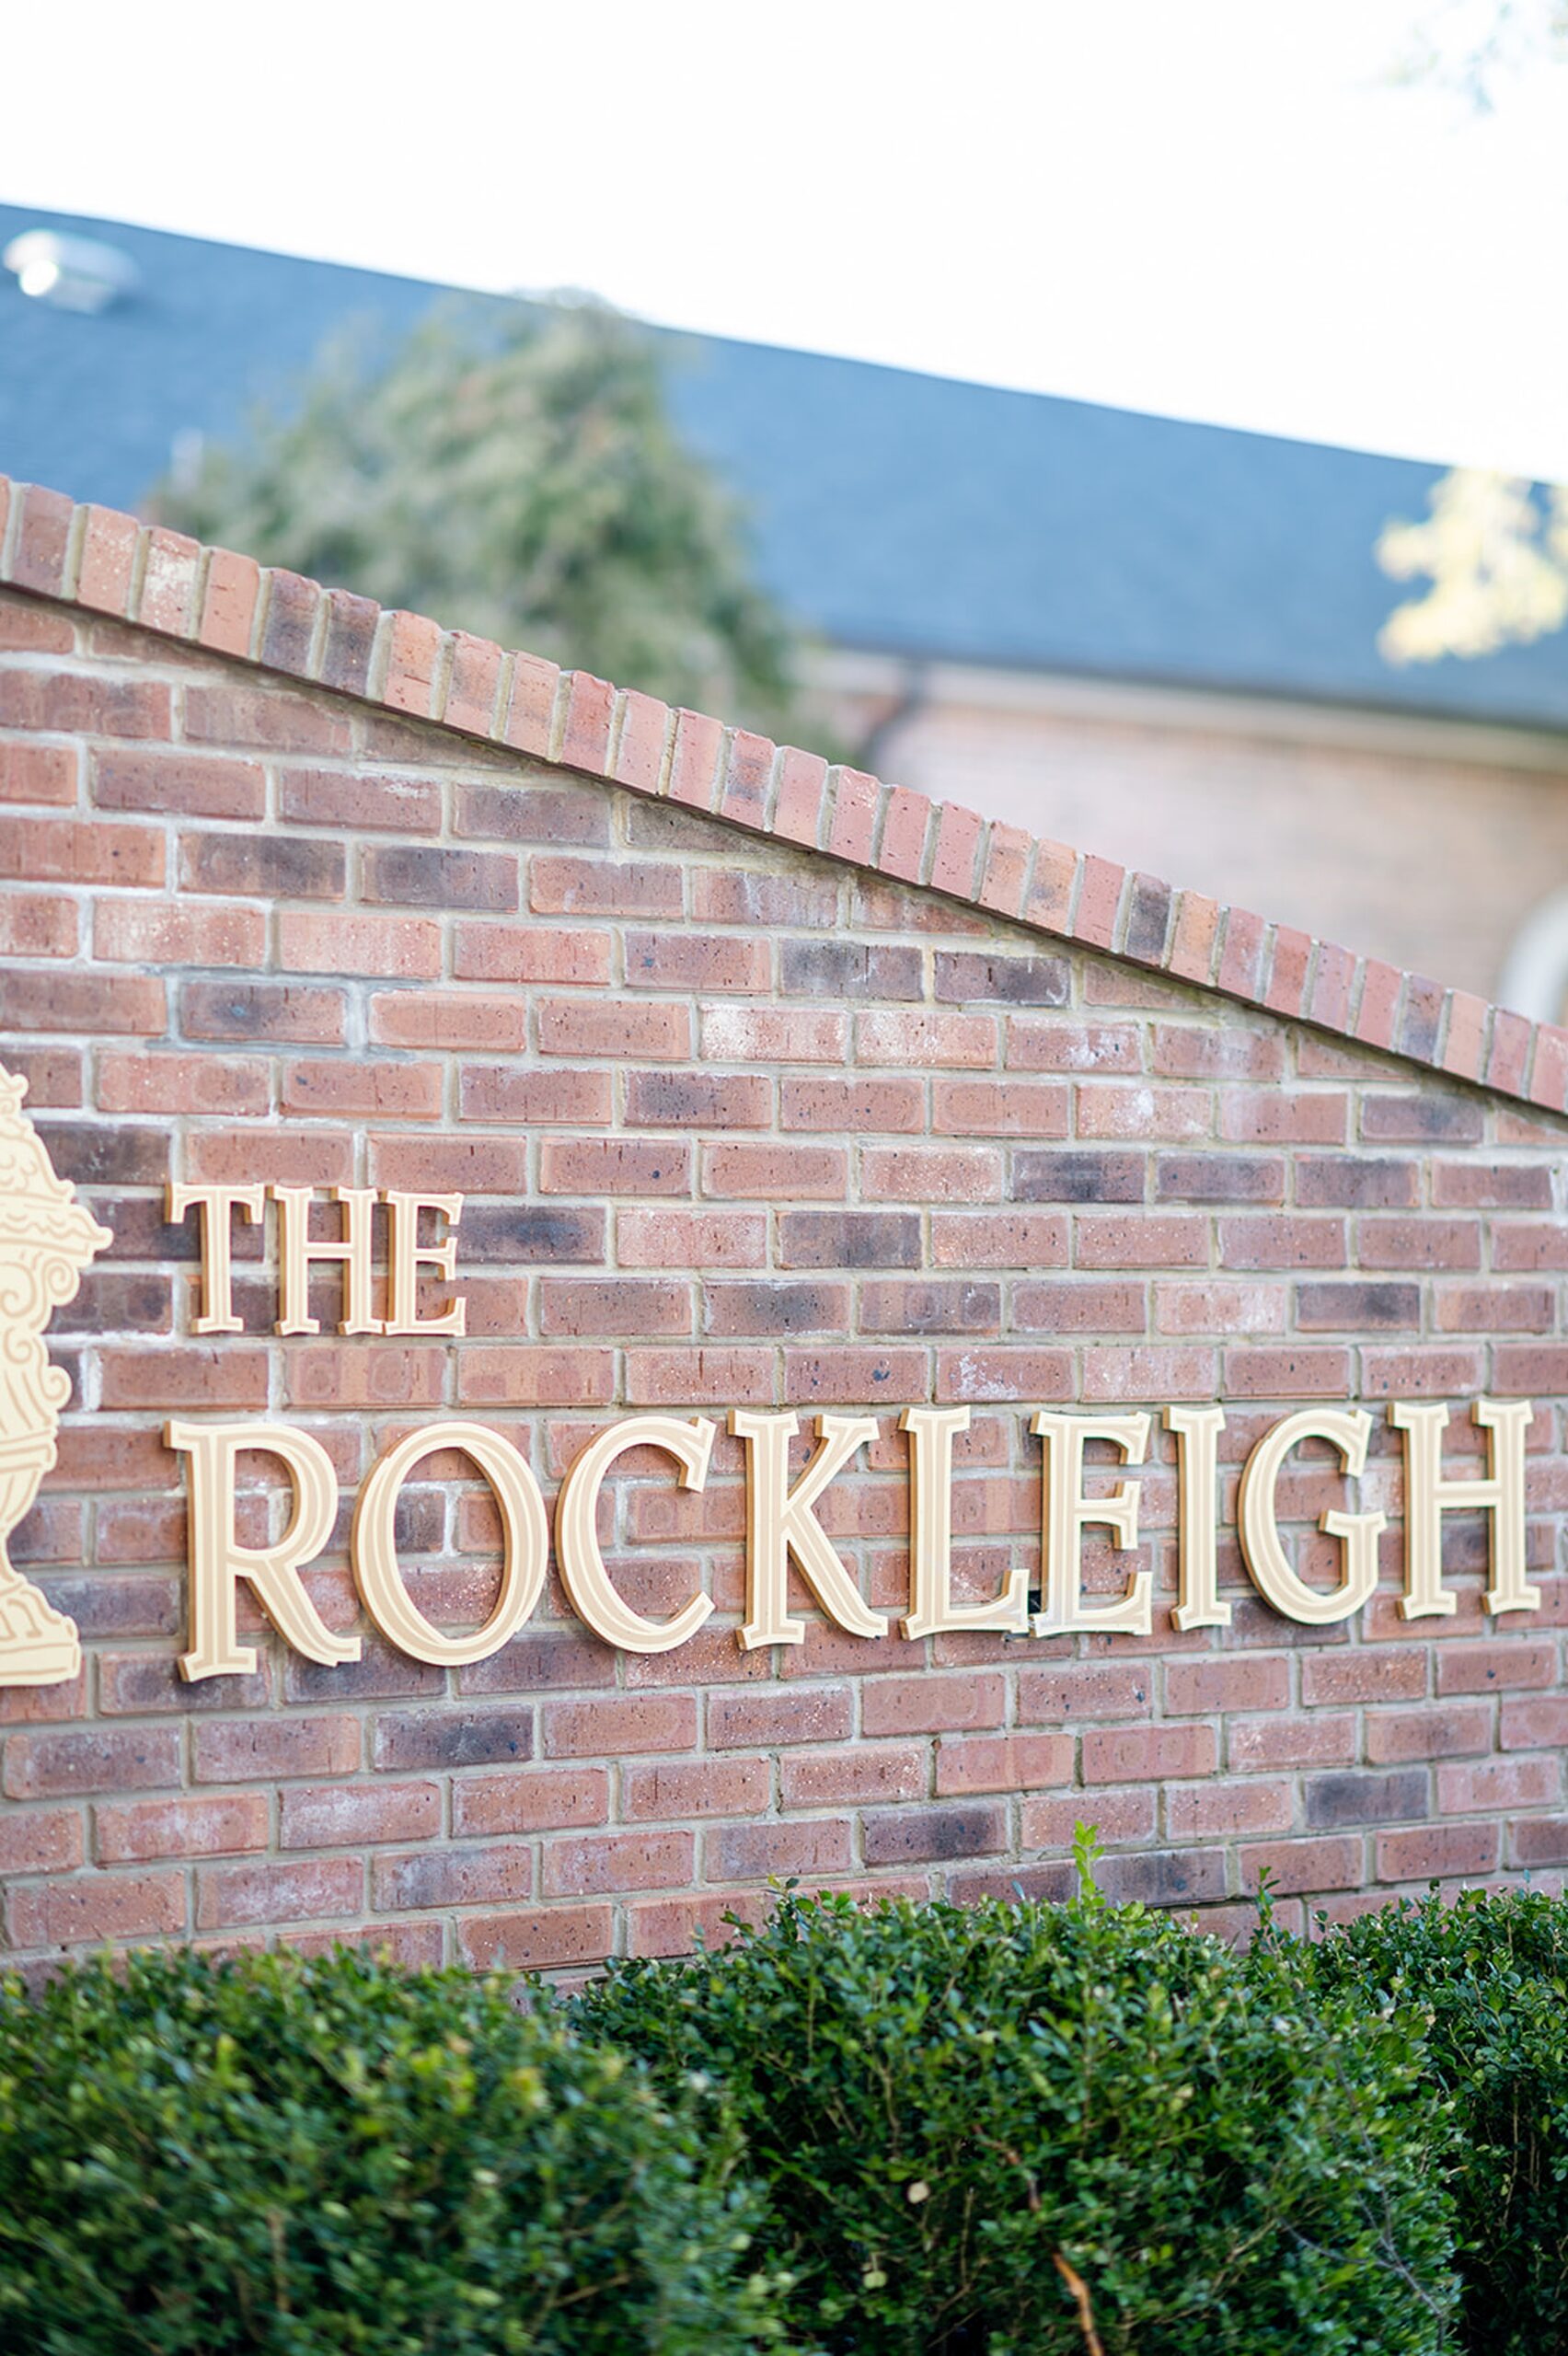 Details of the rockleigh wedding venue brick sign with gold lettering